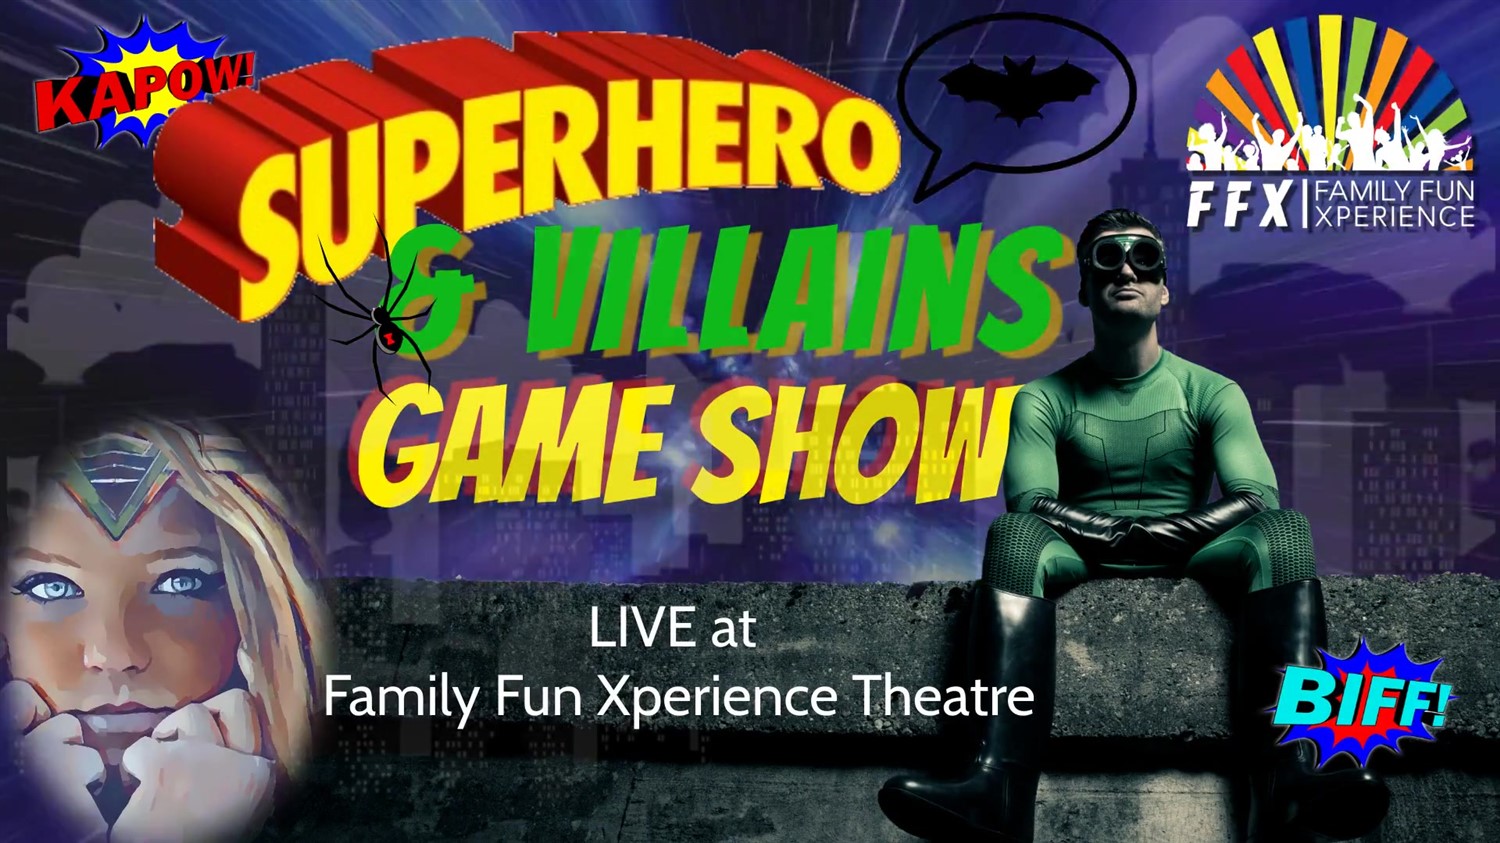 SUPERHEROES & VILLAINS Live Game Show with Super-charged Fun for Everyone! on Sep 28, 19:00@FFX Theatre - Pick a seat, Buy tickets and Get information on Family Fun Xperience tickets.ffxshow.org